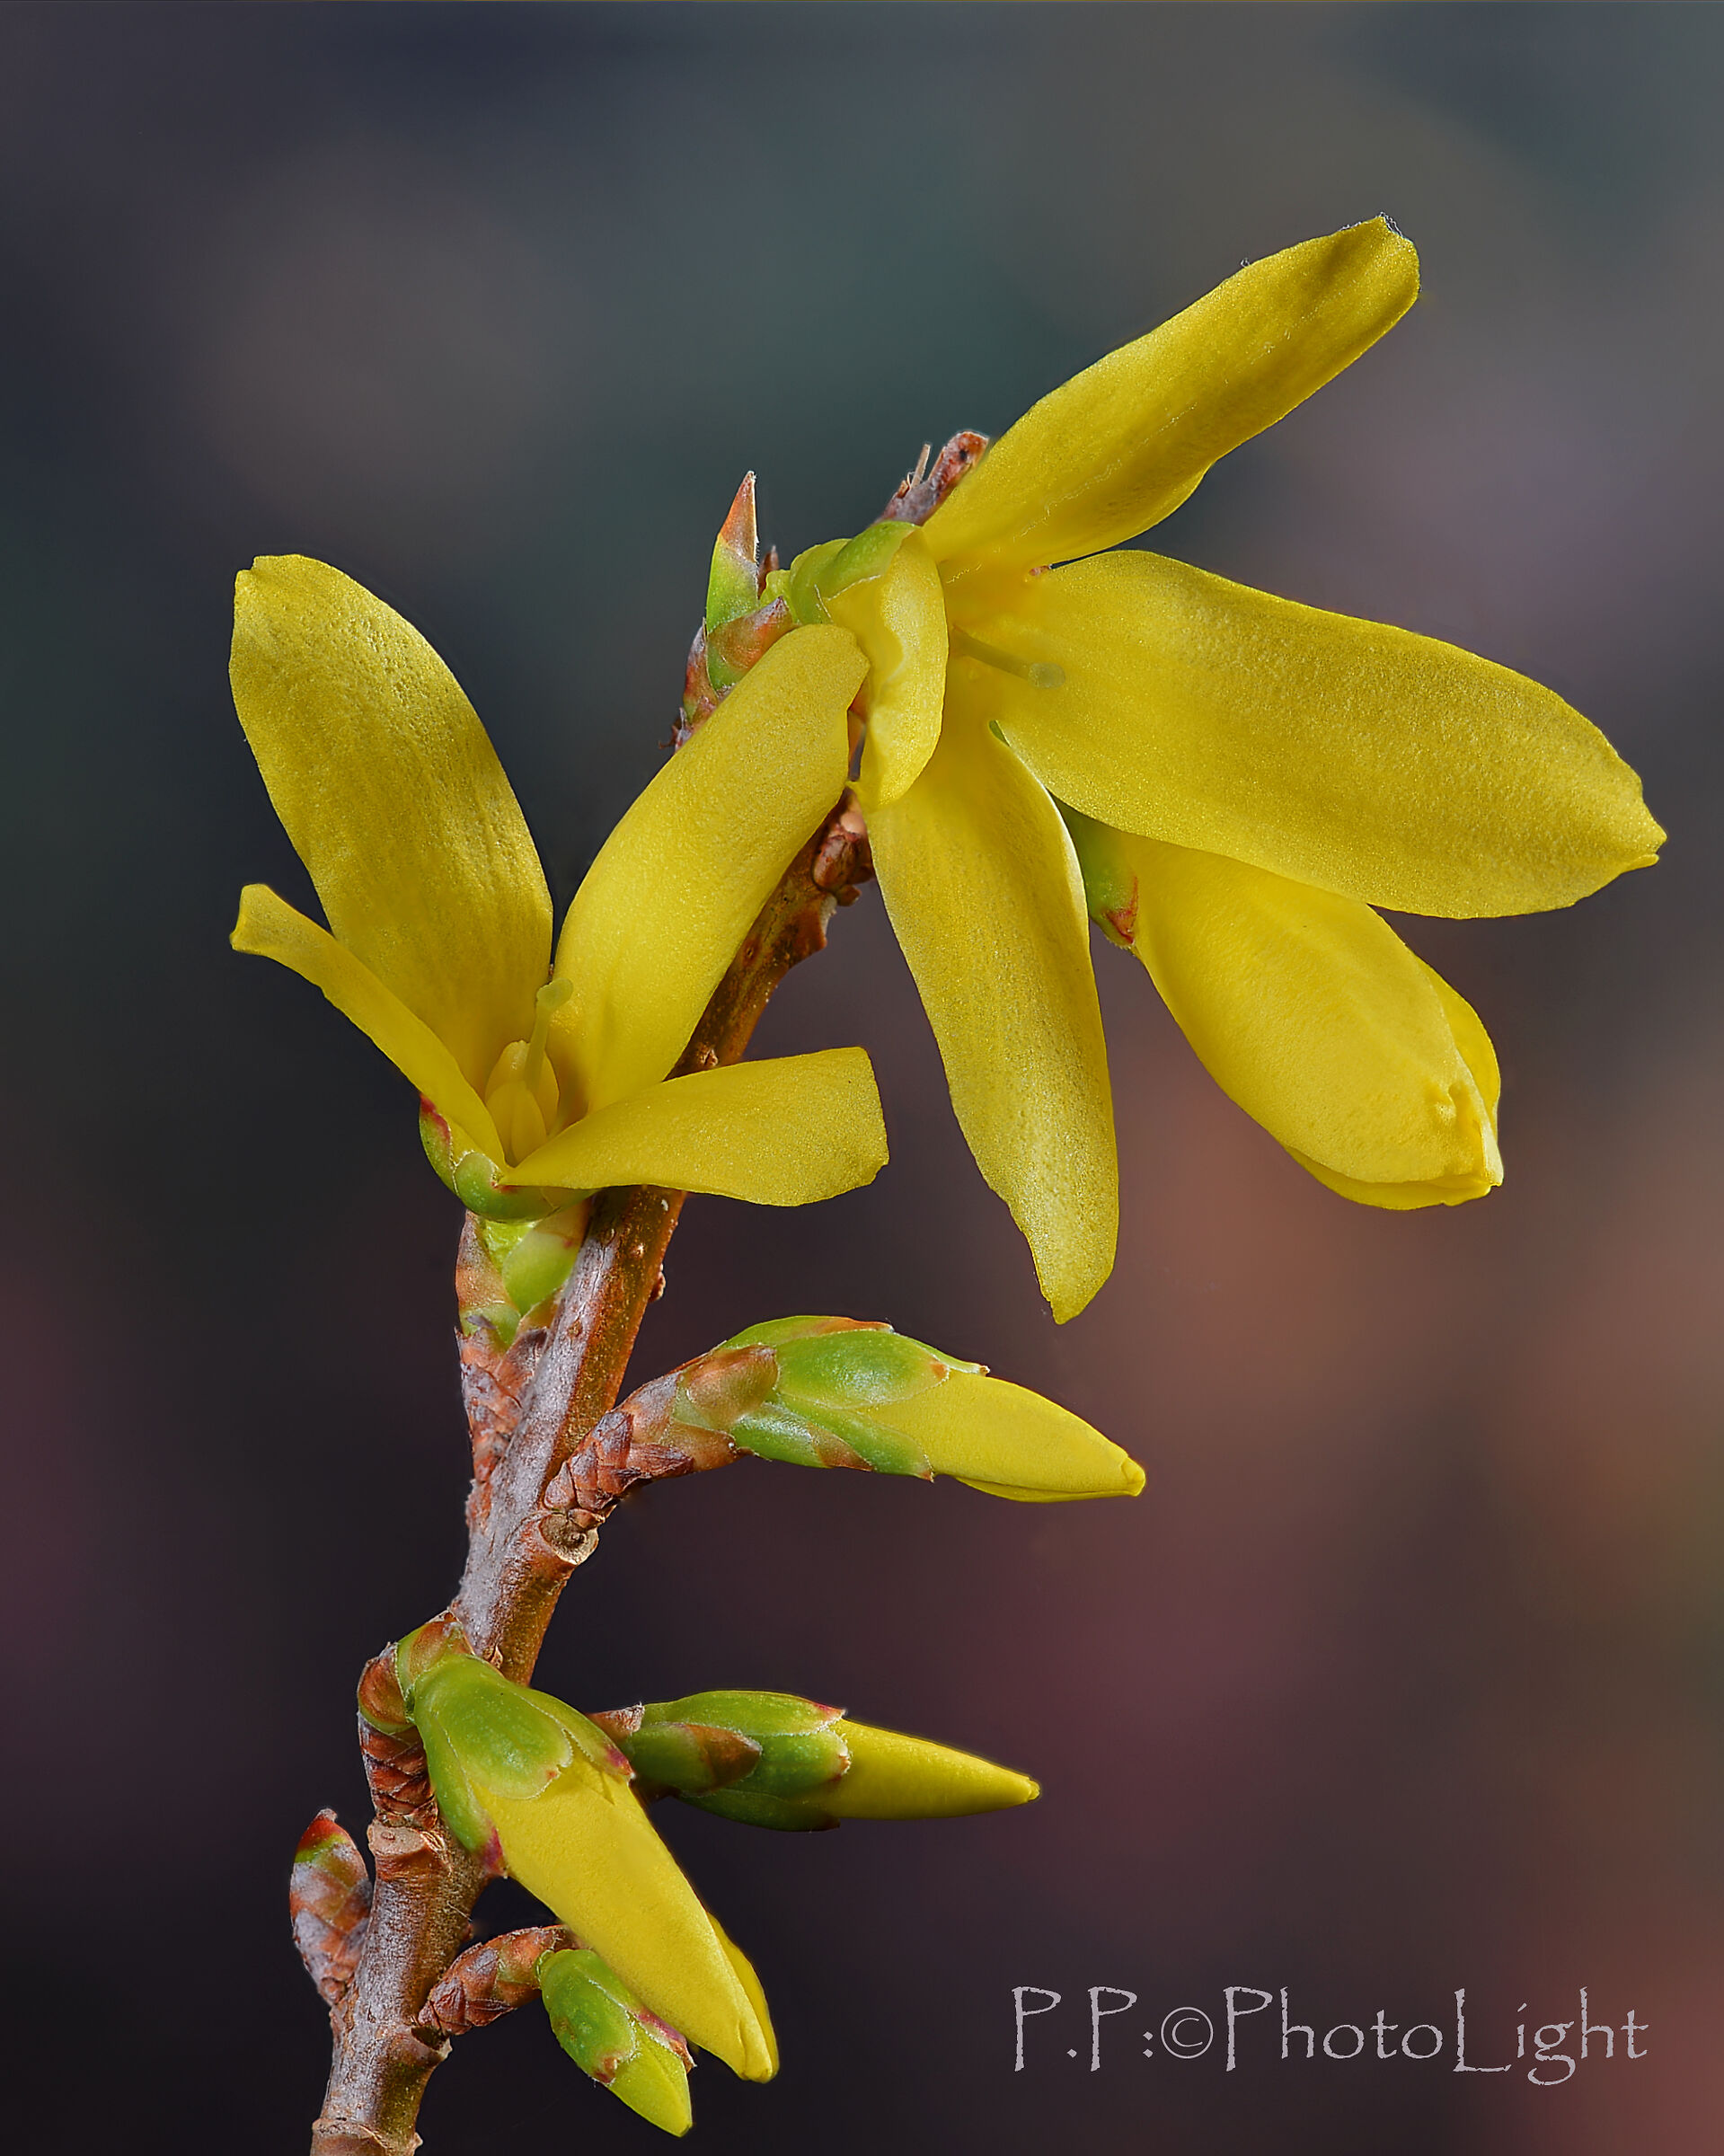 When it's forsythia, it's spring...